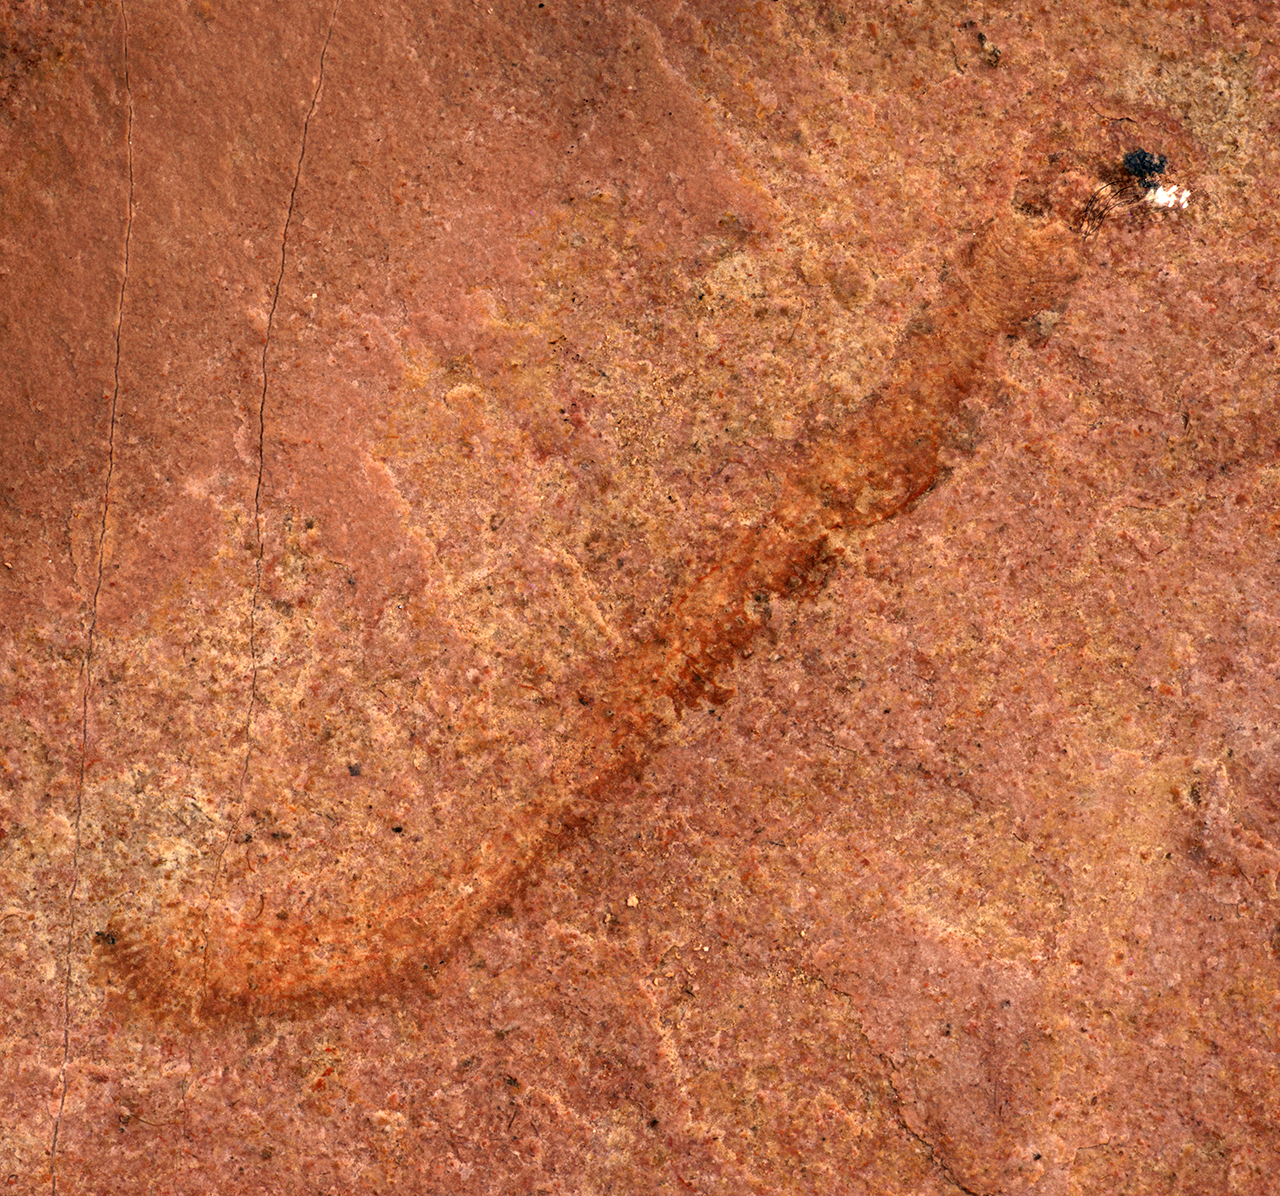 The worm-like creature's fossil is visible as dark red rock in slightly lighter red rock